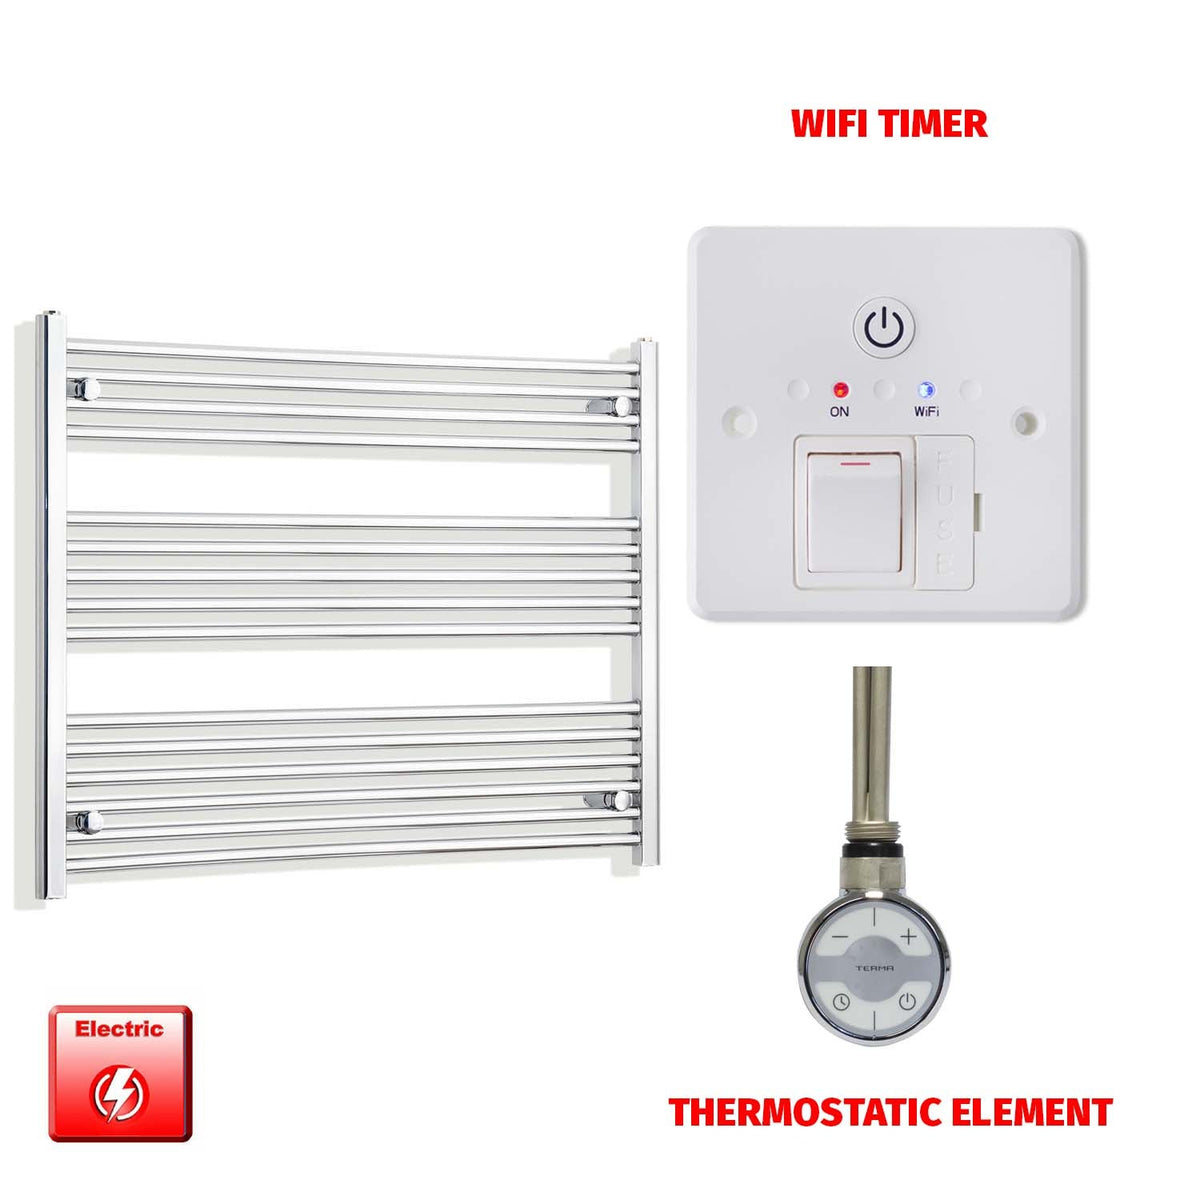 800mm High 950mm Wide Pre-Filled Electric Heated Towel Rail Radiator Straight Chrome MOA Thermostatic element Wifi timer